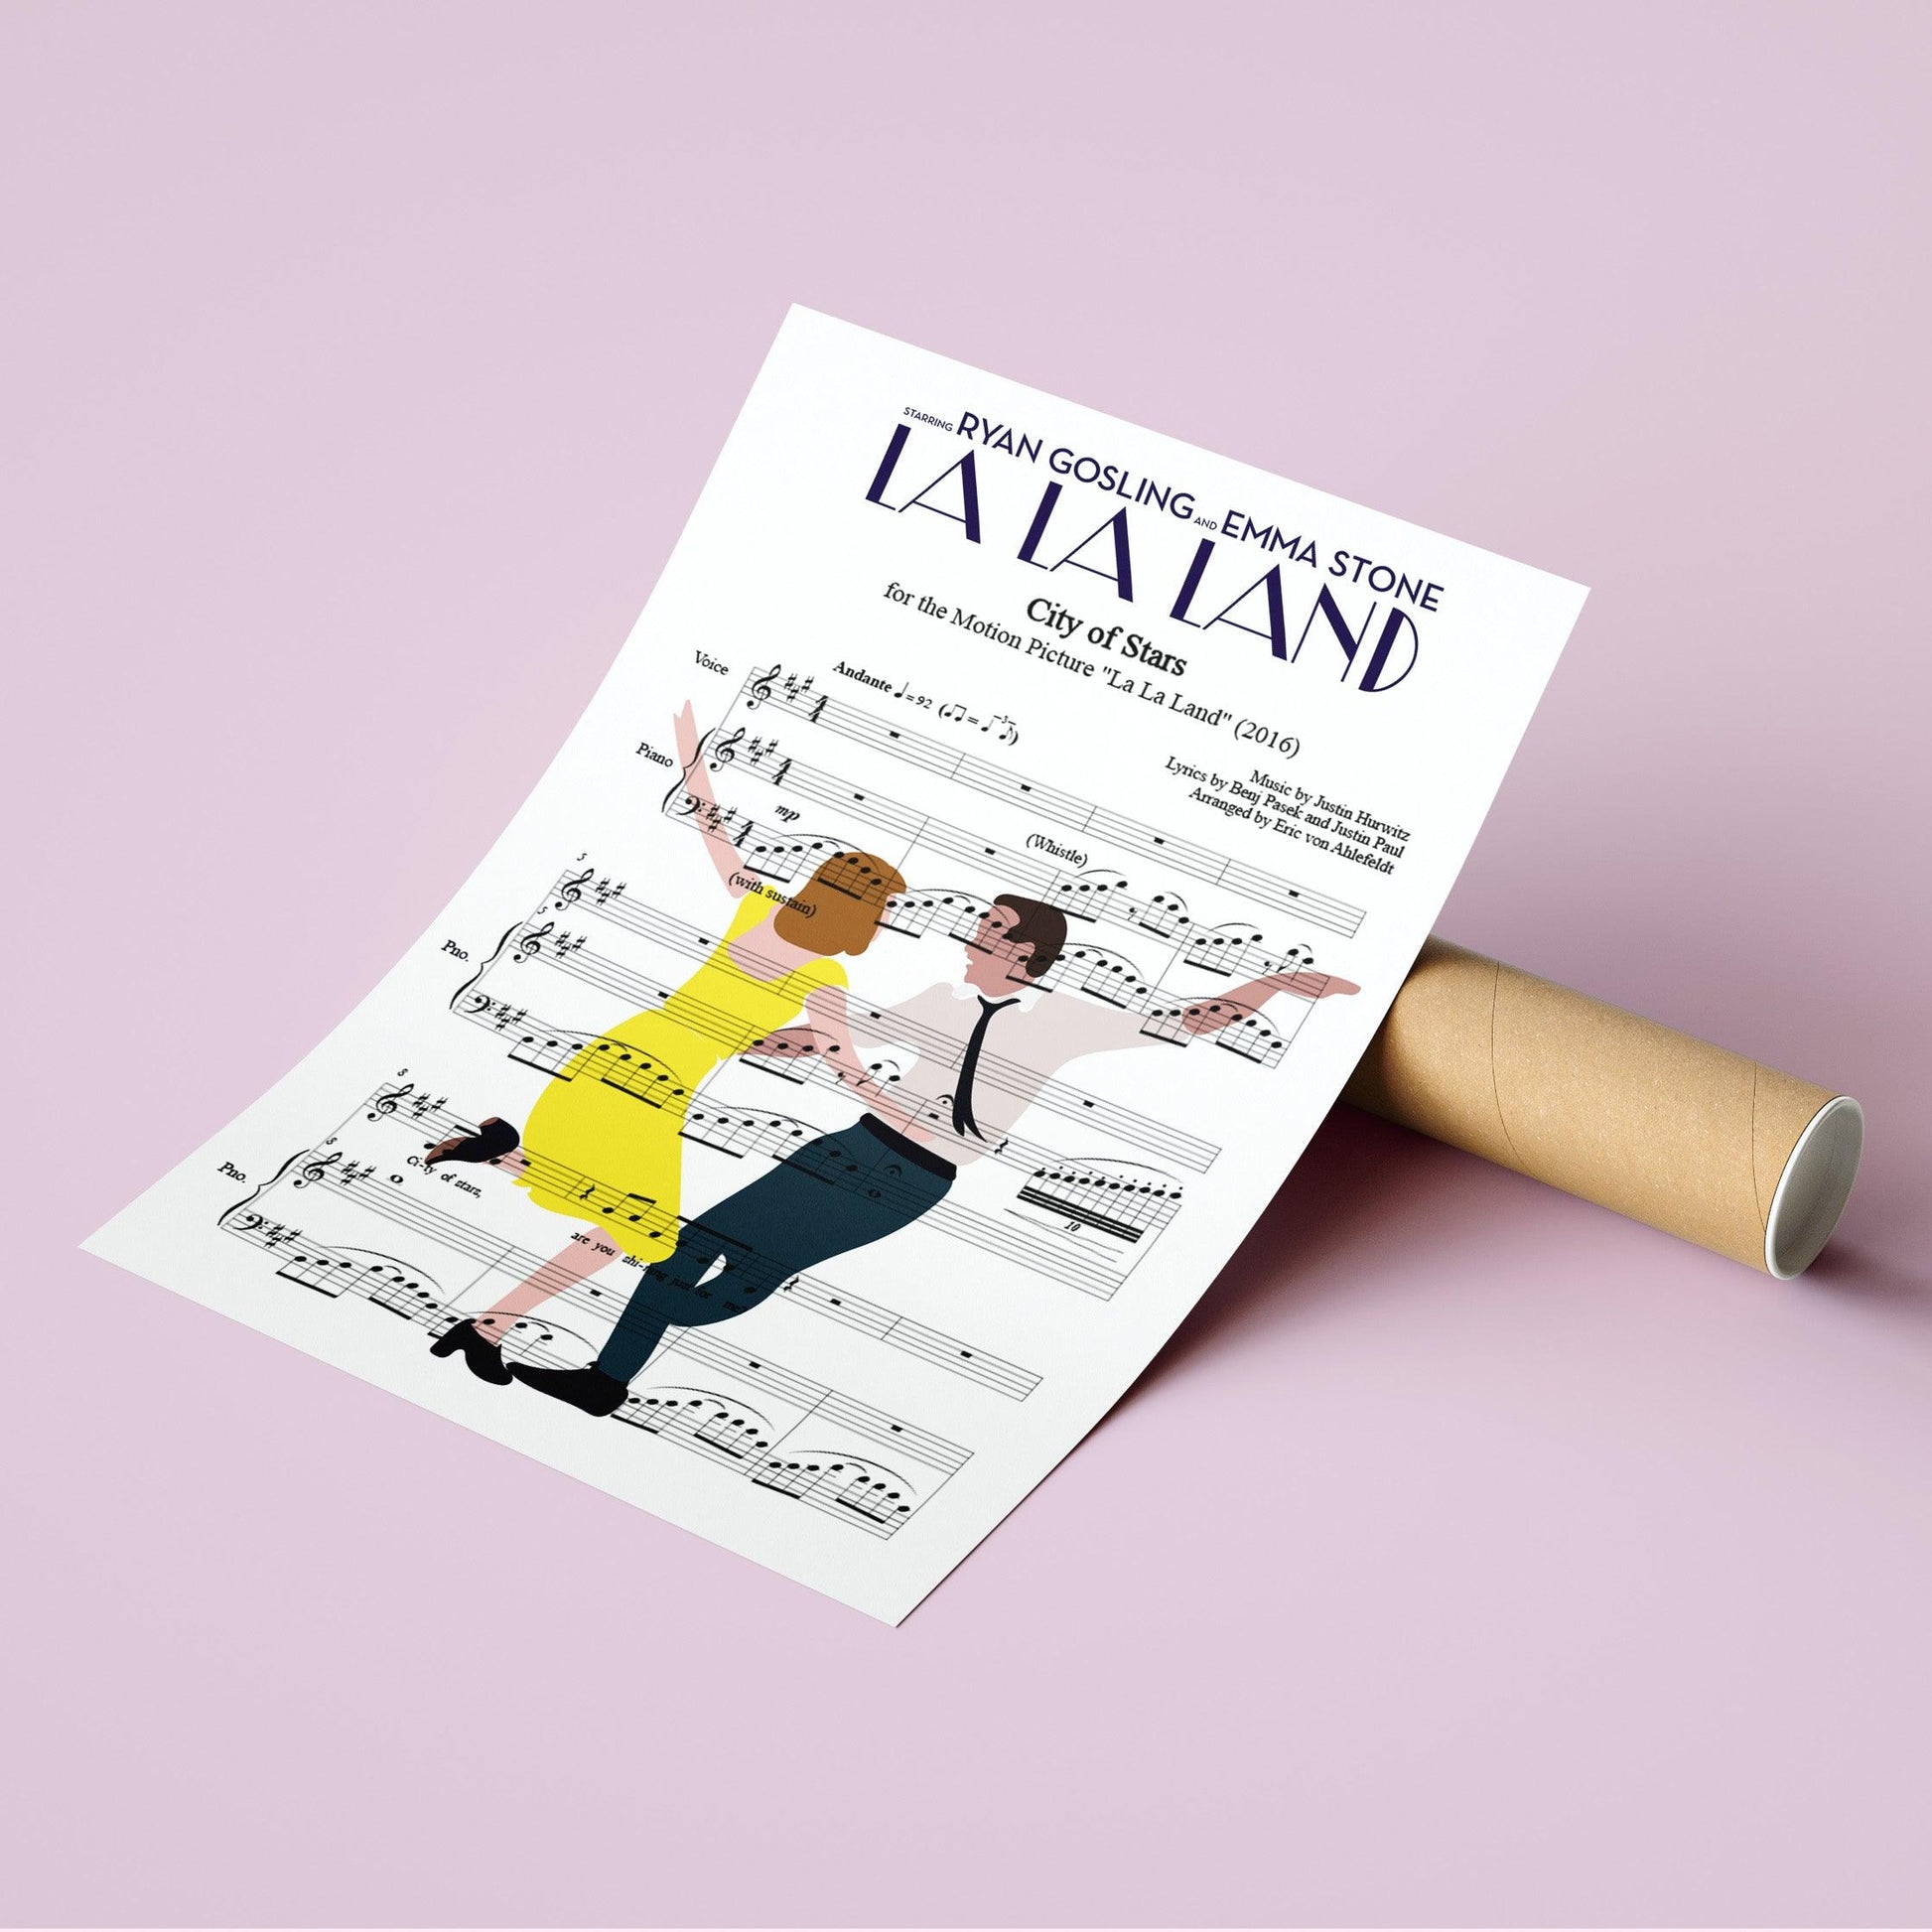 La La Land • City of Stars Song Lyric Print | Song Music Sheet Notes Print  Everyone has a favorite song and now you can show the score as printed staff. The personal favorite song sheet print shows the song chosen as the score. 